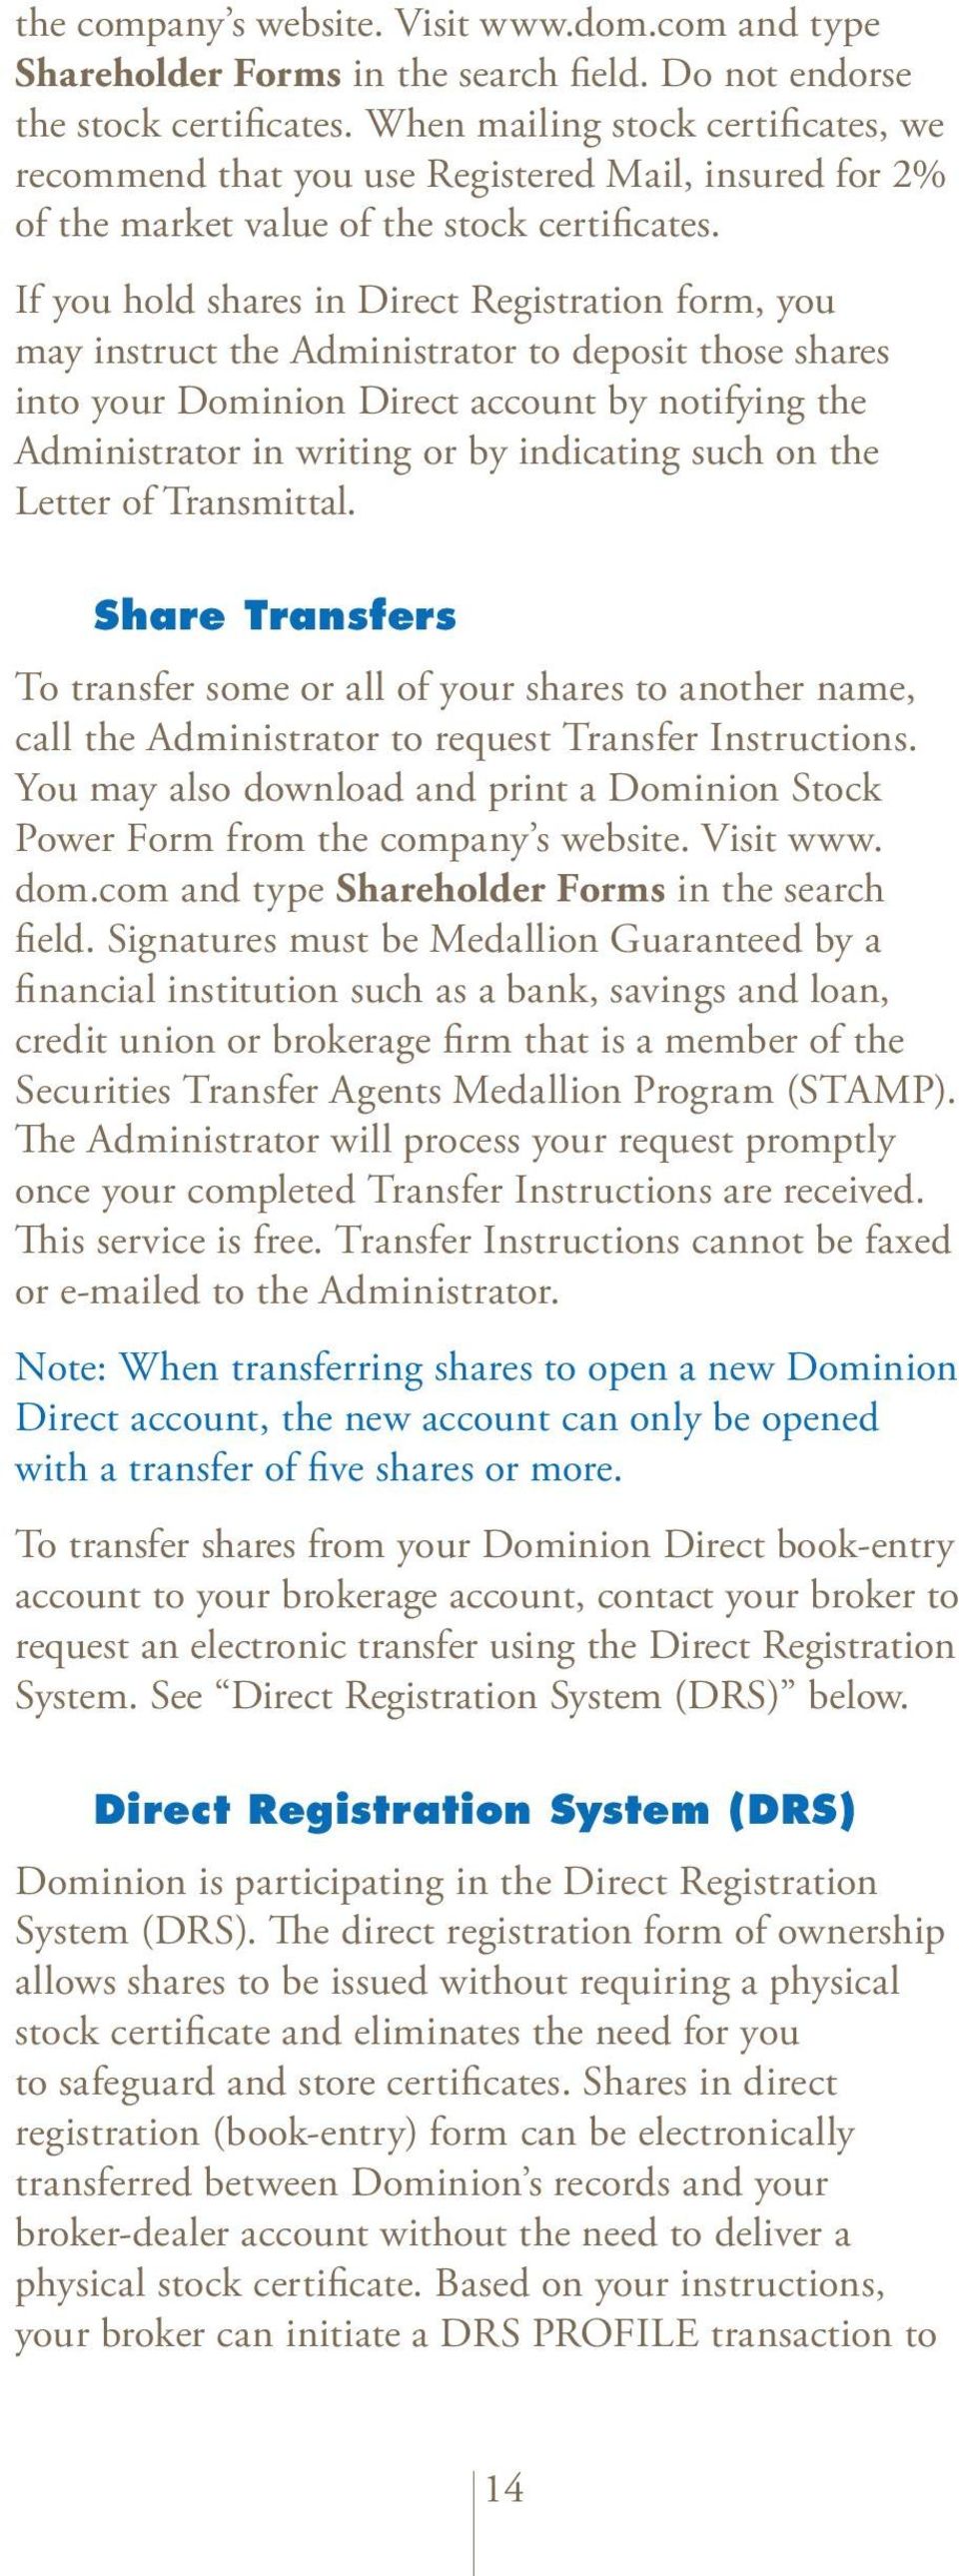 If you hold shares in Direct Registration form, you may instruct the Administrator to deposit those shares into your Dominion Direct account by notifying the Administrator in writing or by indicating